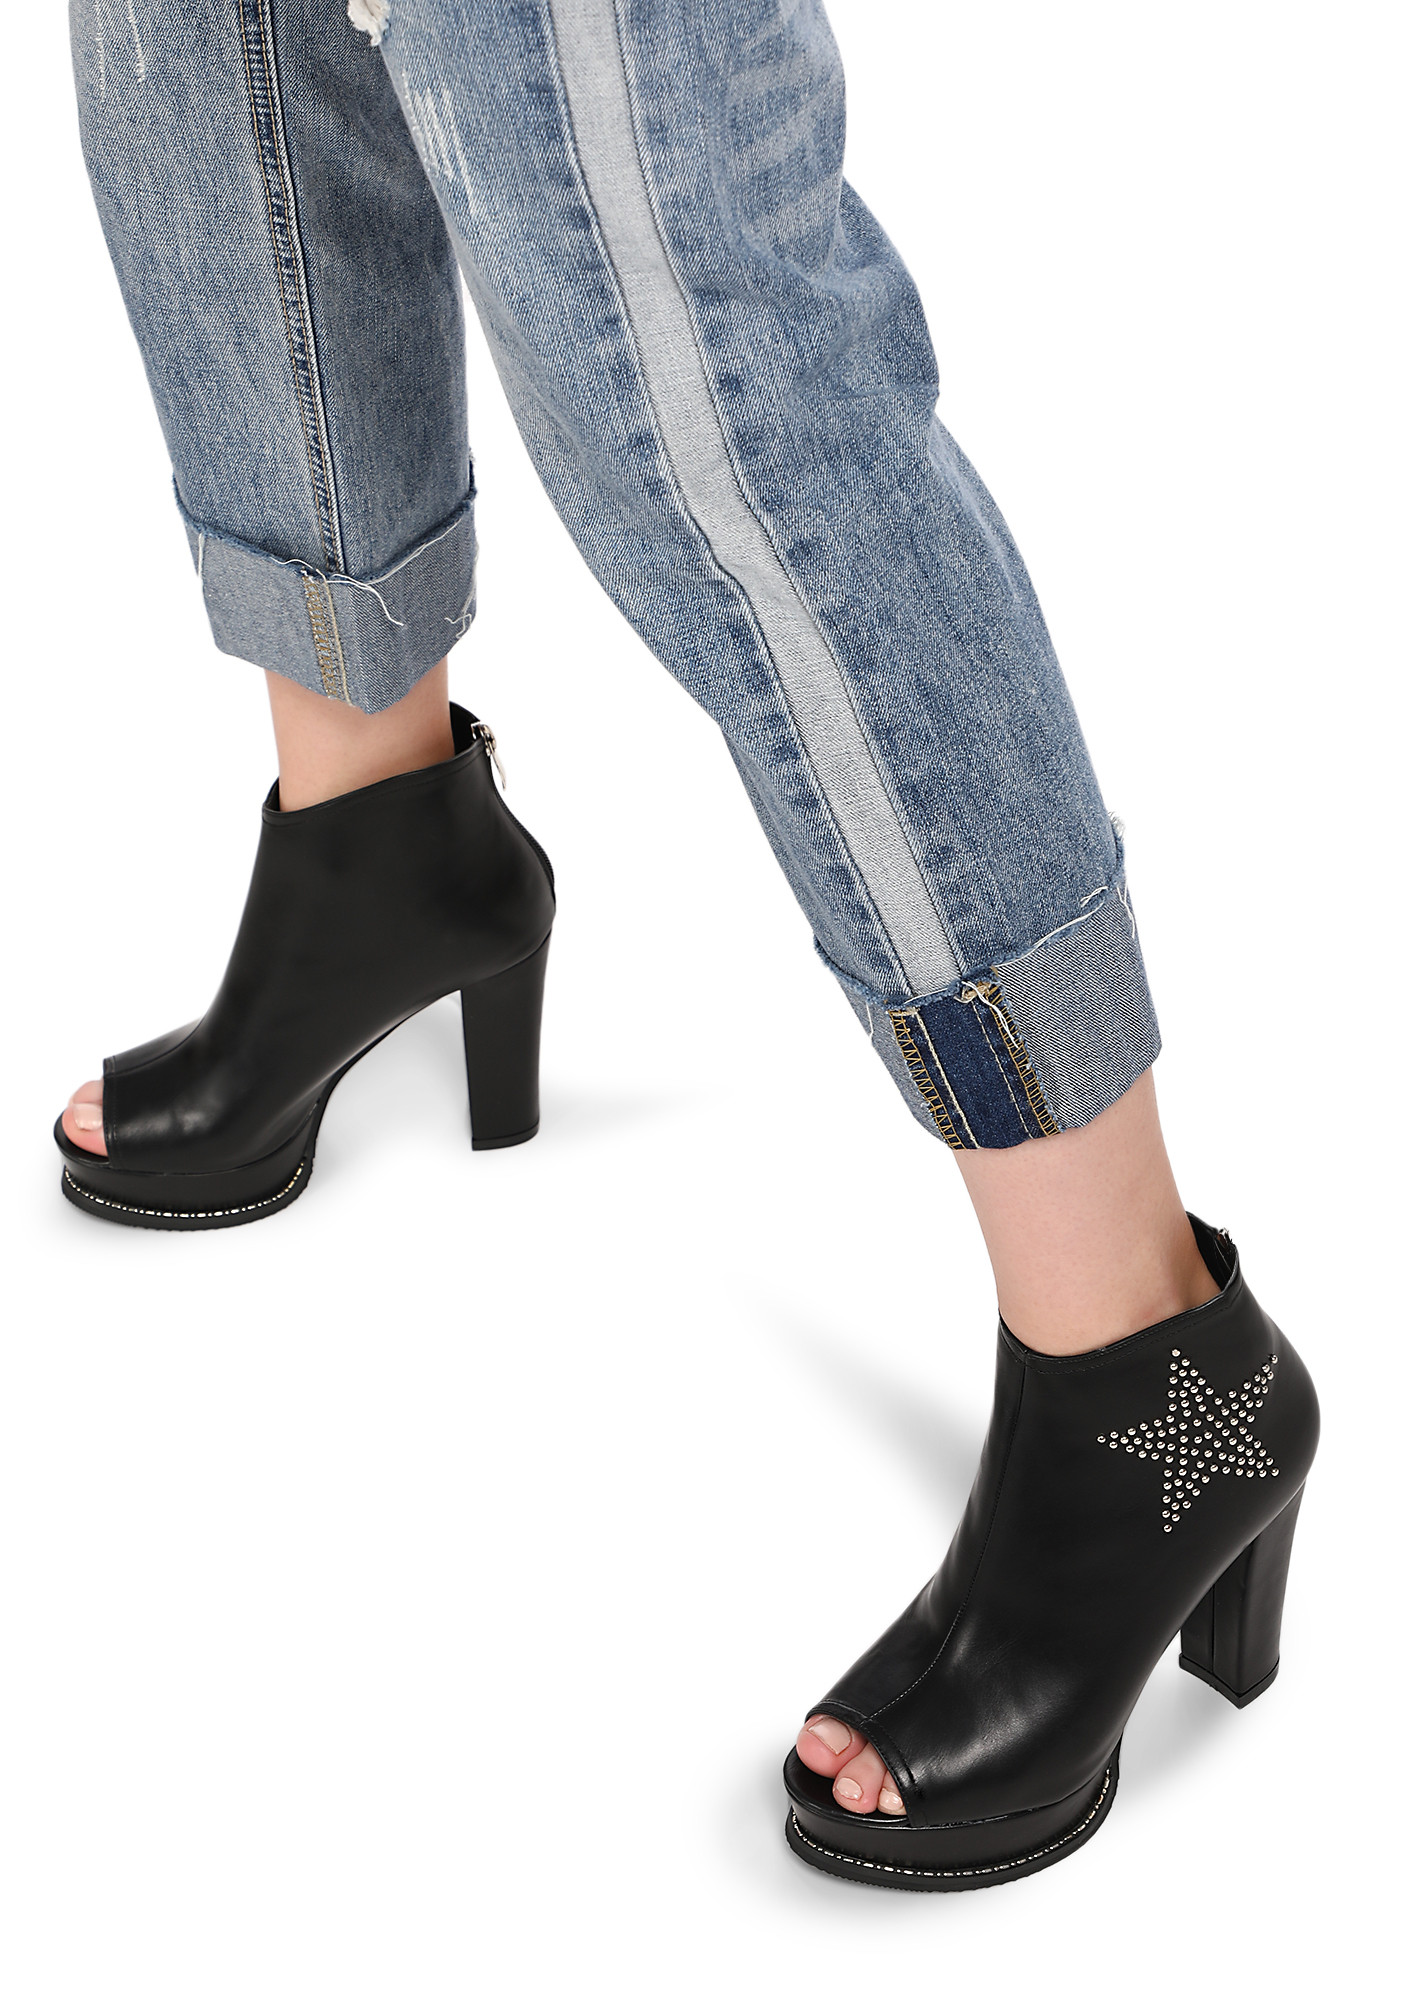 STARS OF WISDOM BLACK ANKLE BOOTS